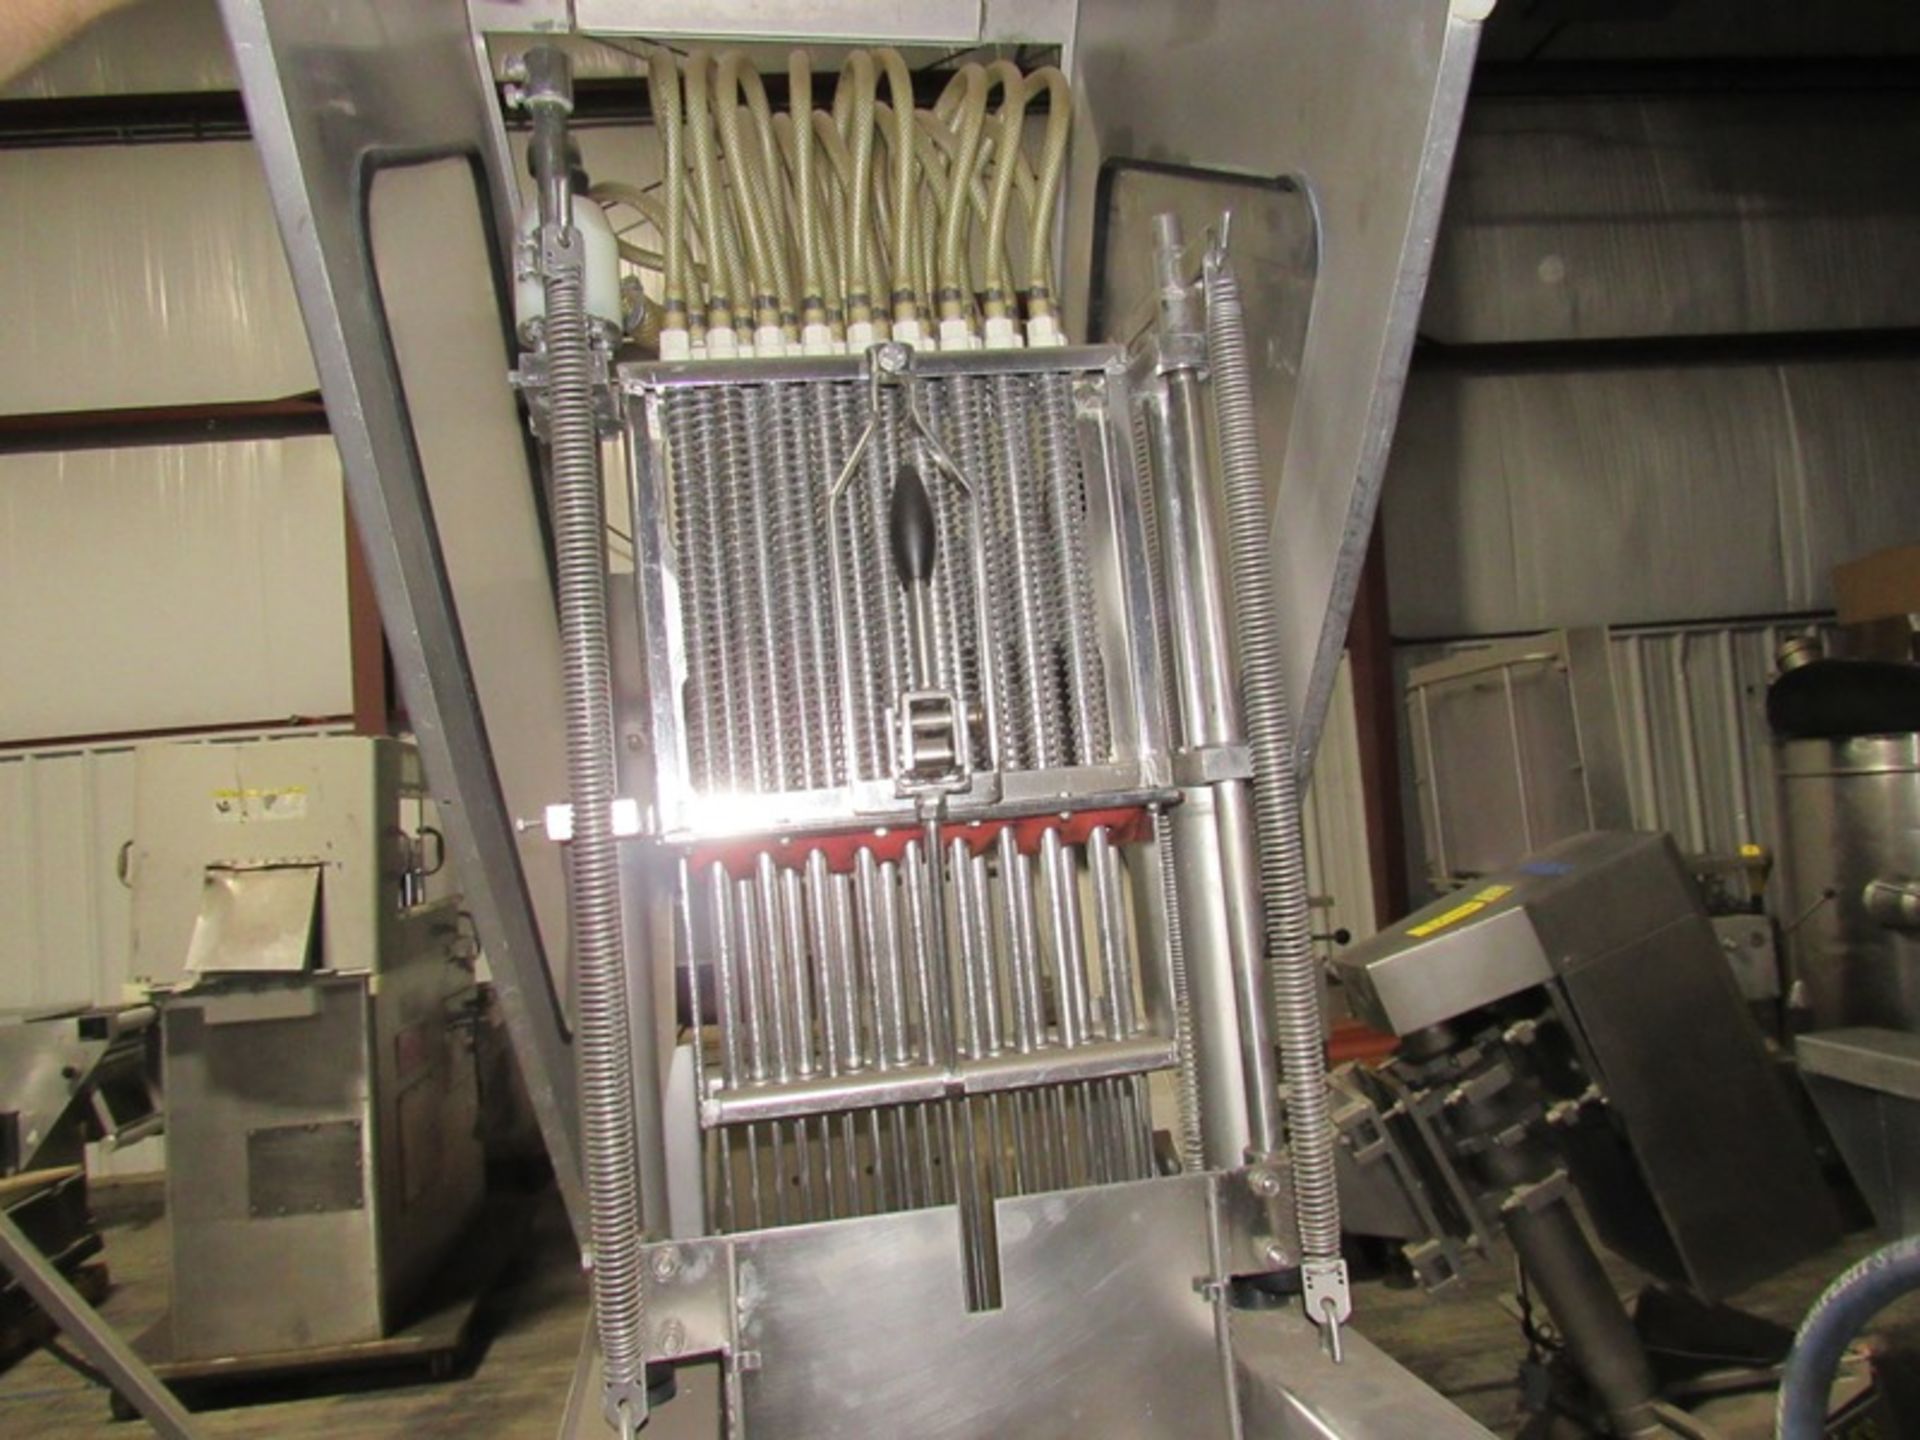 Injectstar Pickle Injector, 12" W X 53" L conveyor, (50) 4mm needles (Loading Fee: $100.00 - Rigger: - Image 4 of 4